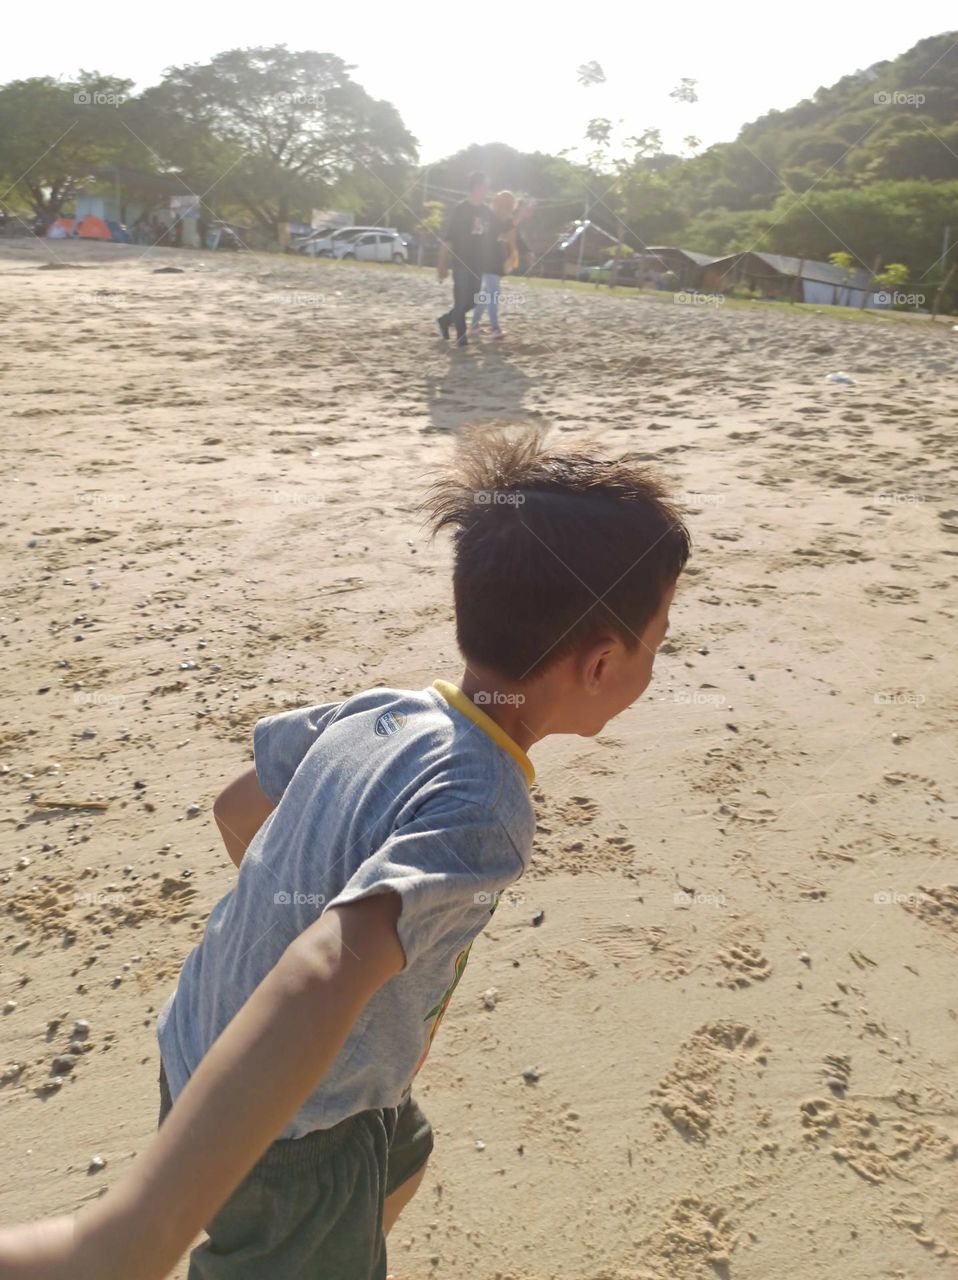 My kid are most happy when playing on the beach